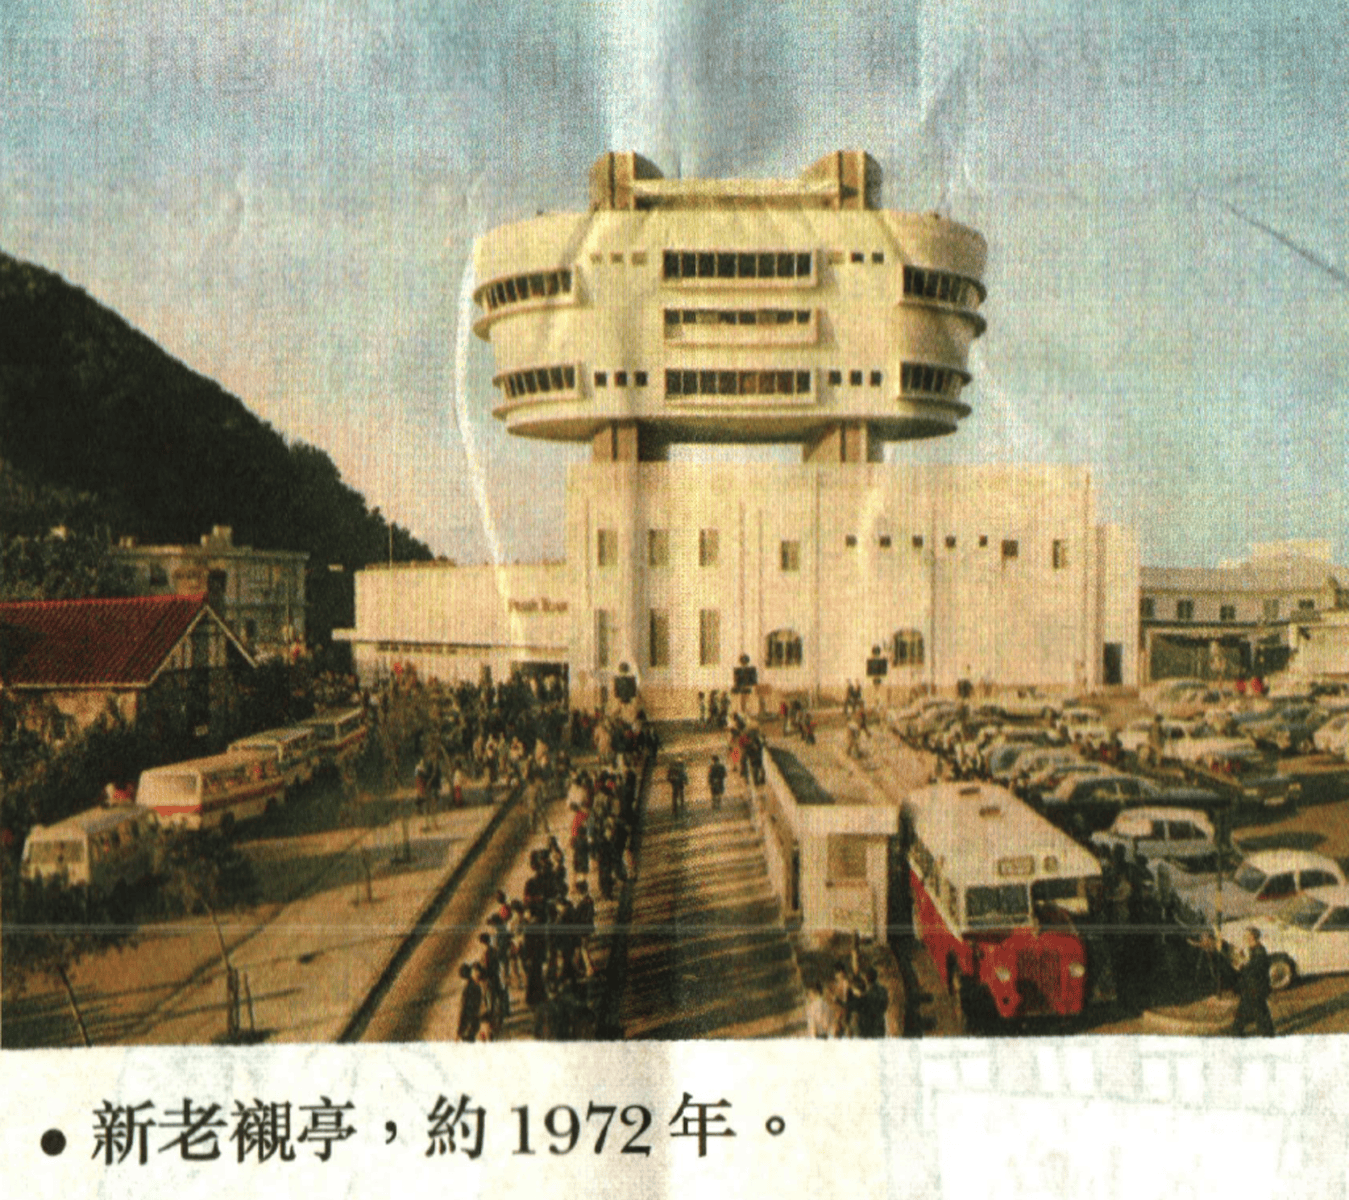 people line up in front of the old peak tower to wait for the bus in 1972